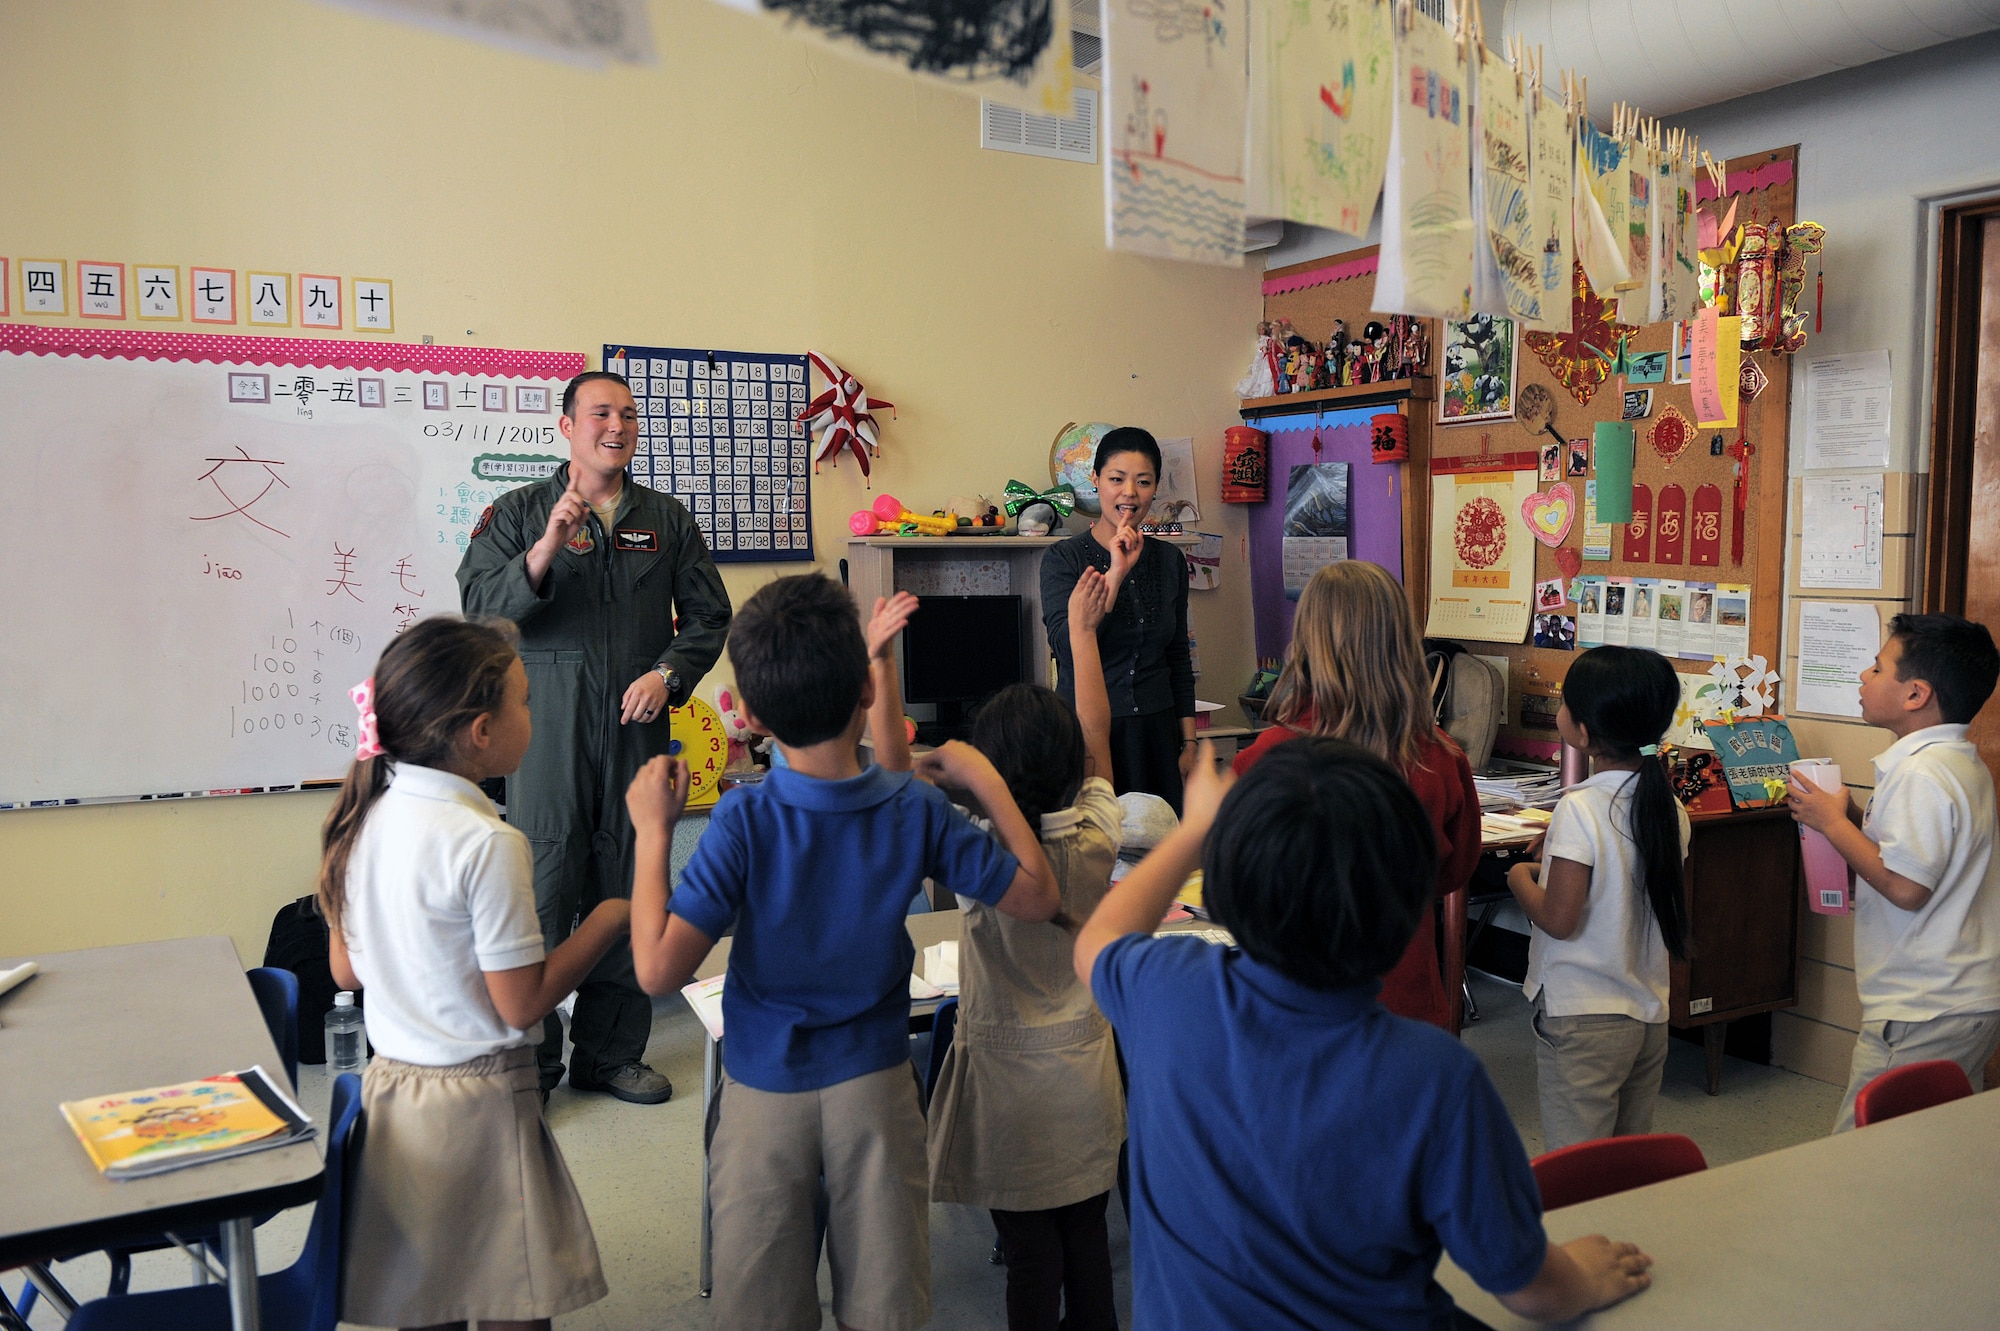 U.S. Air Force Tech. Sgt. Jonathan Roe, 55th Electronic Combat Group Chinese linguist, and Hsin-Fen Chang, International School of Tucson Chinese teacher, recite a Chinese poem with students at the International School of Tucson in Tucson, Ariz., March 11, 2015. Roe has been volunteering to assist the students with the study of the Chinese language since January. (U.S. Air Force photo by Airman 1st Class Chris Drzazgowski/Released) 